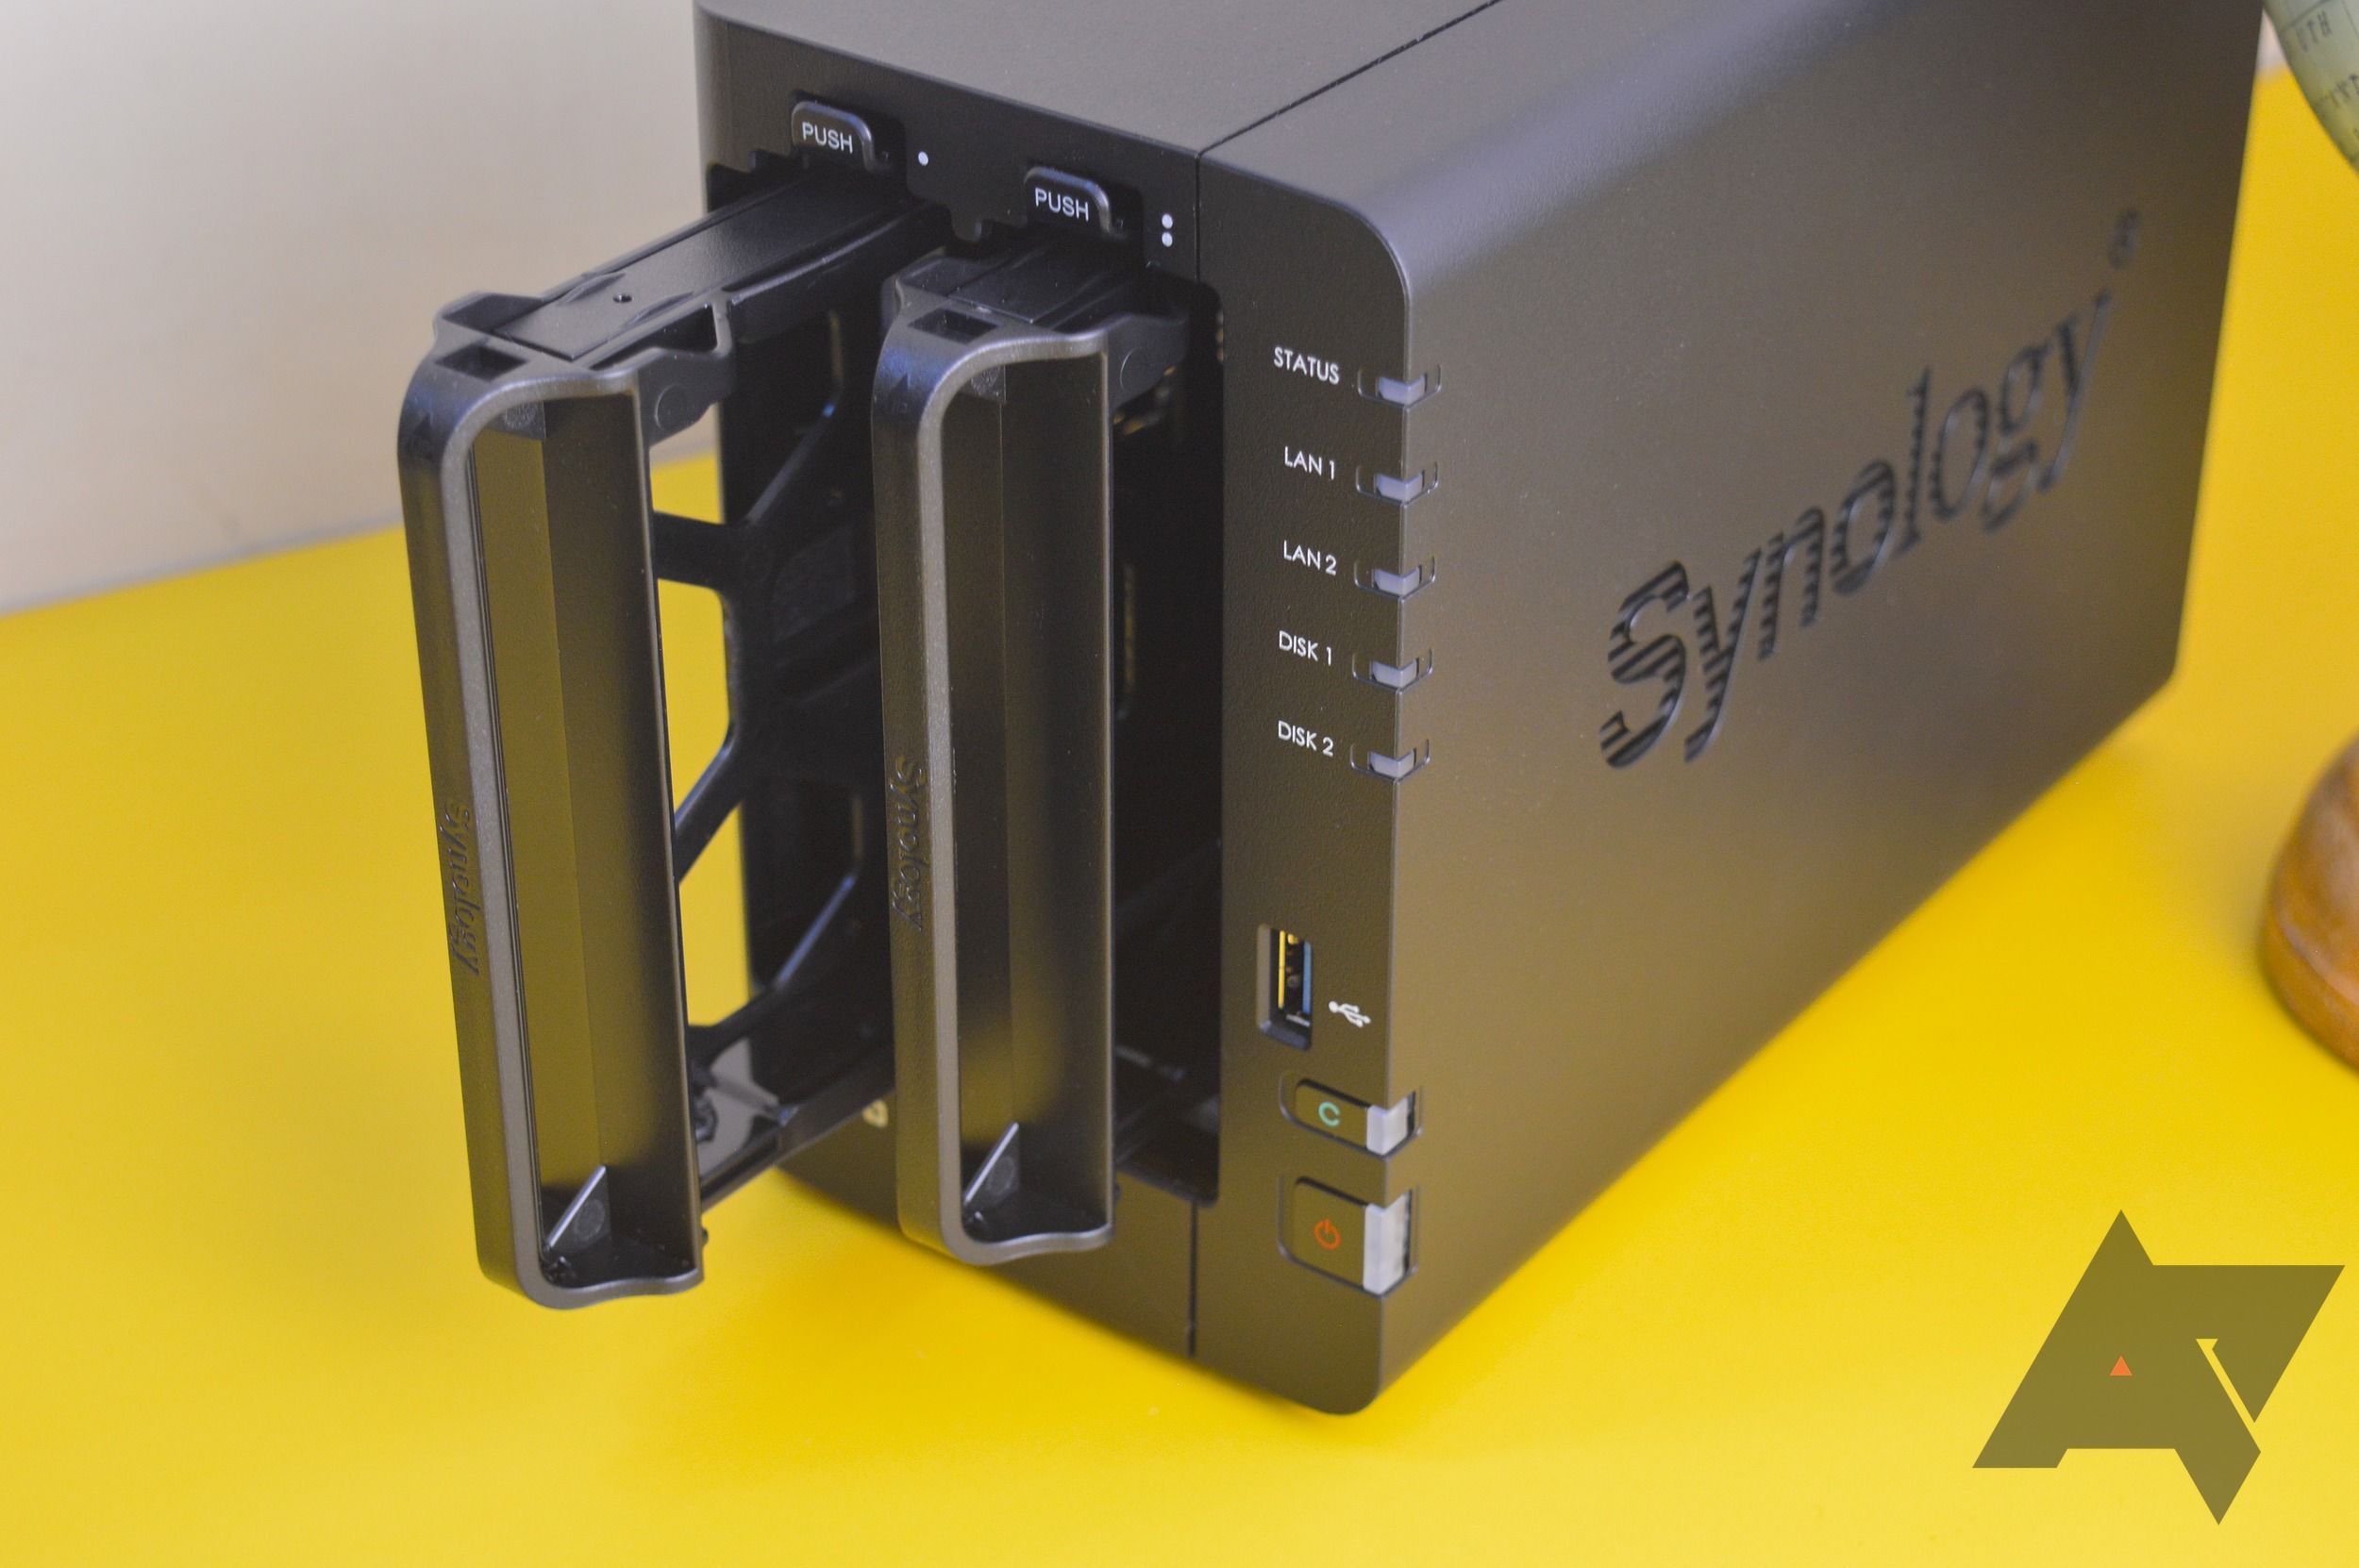 Synology DiskStation DS224+ vs. TerraMaster F2-223: Which NAS is best?